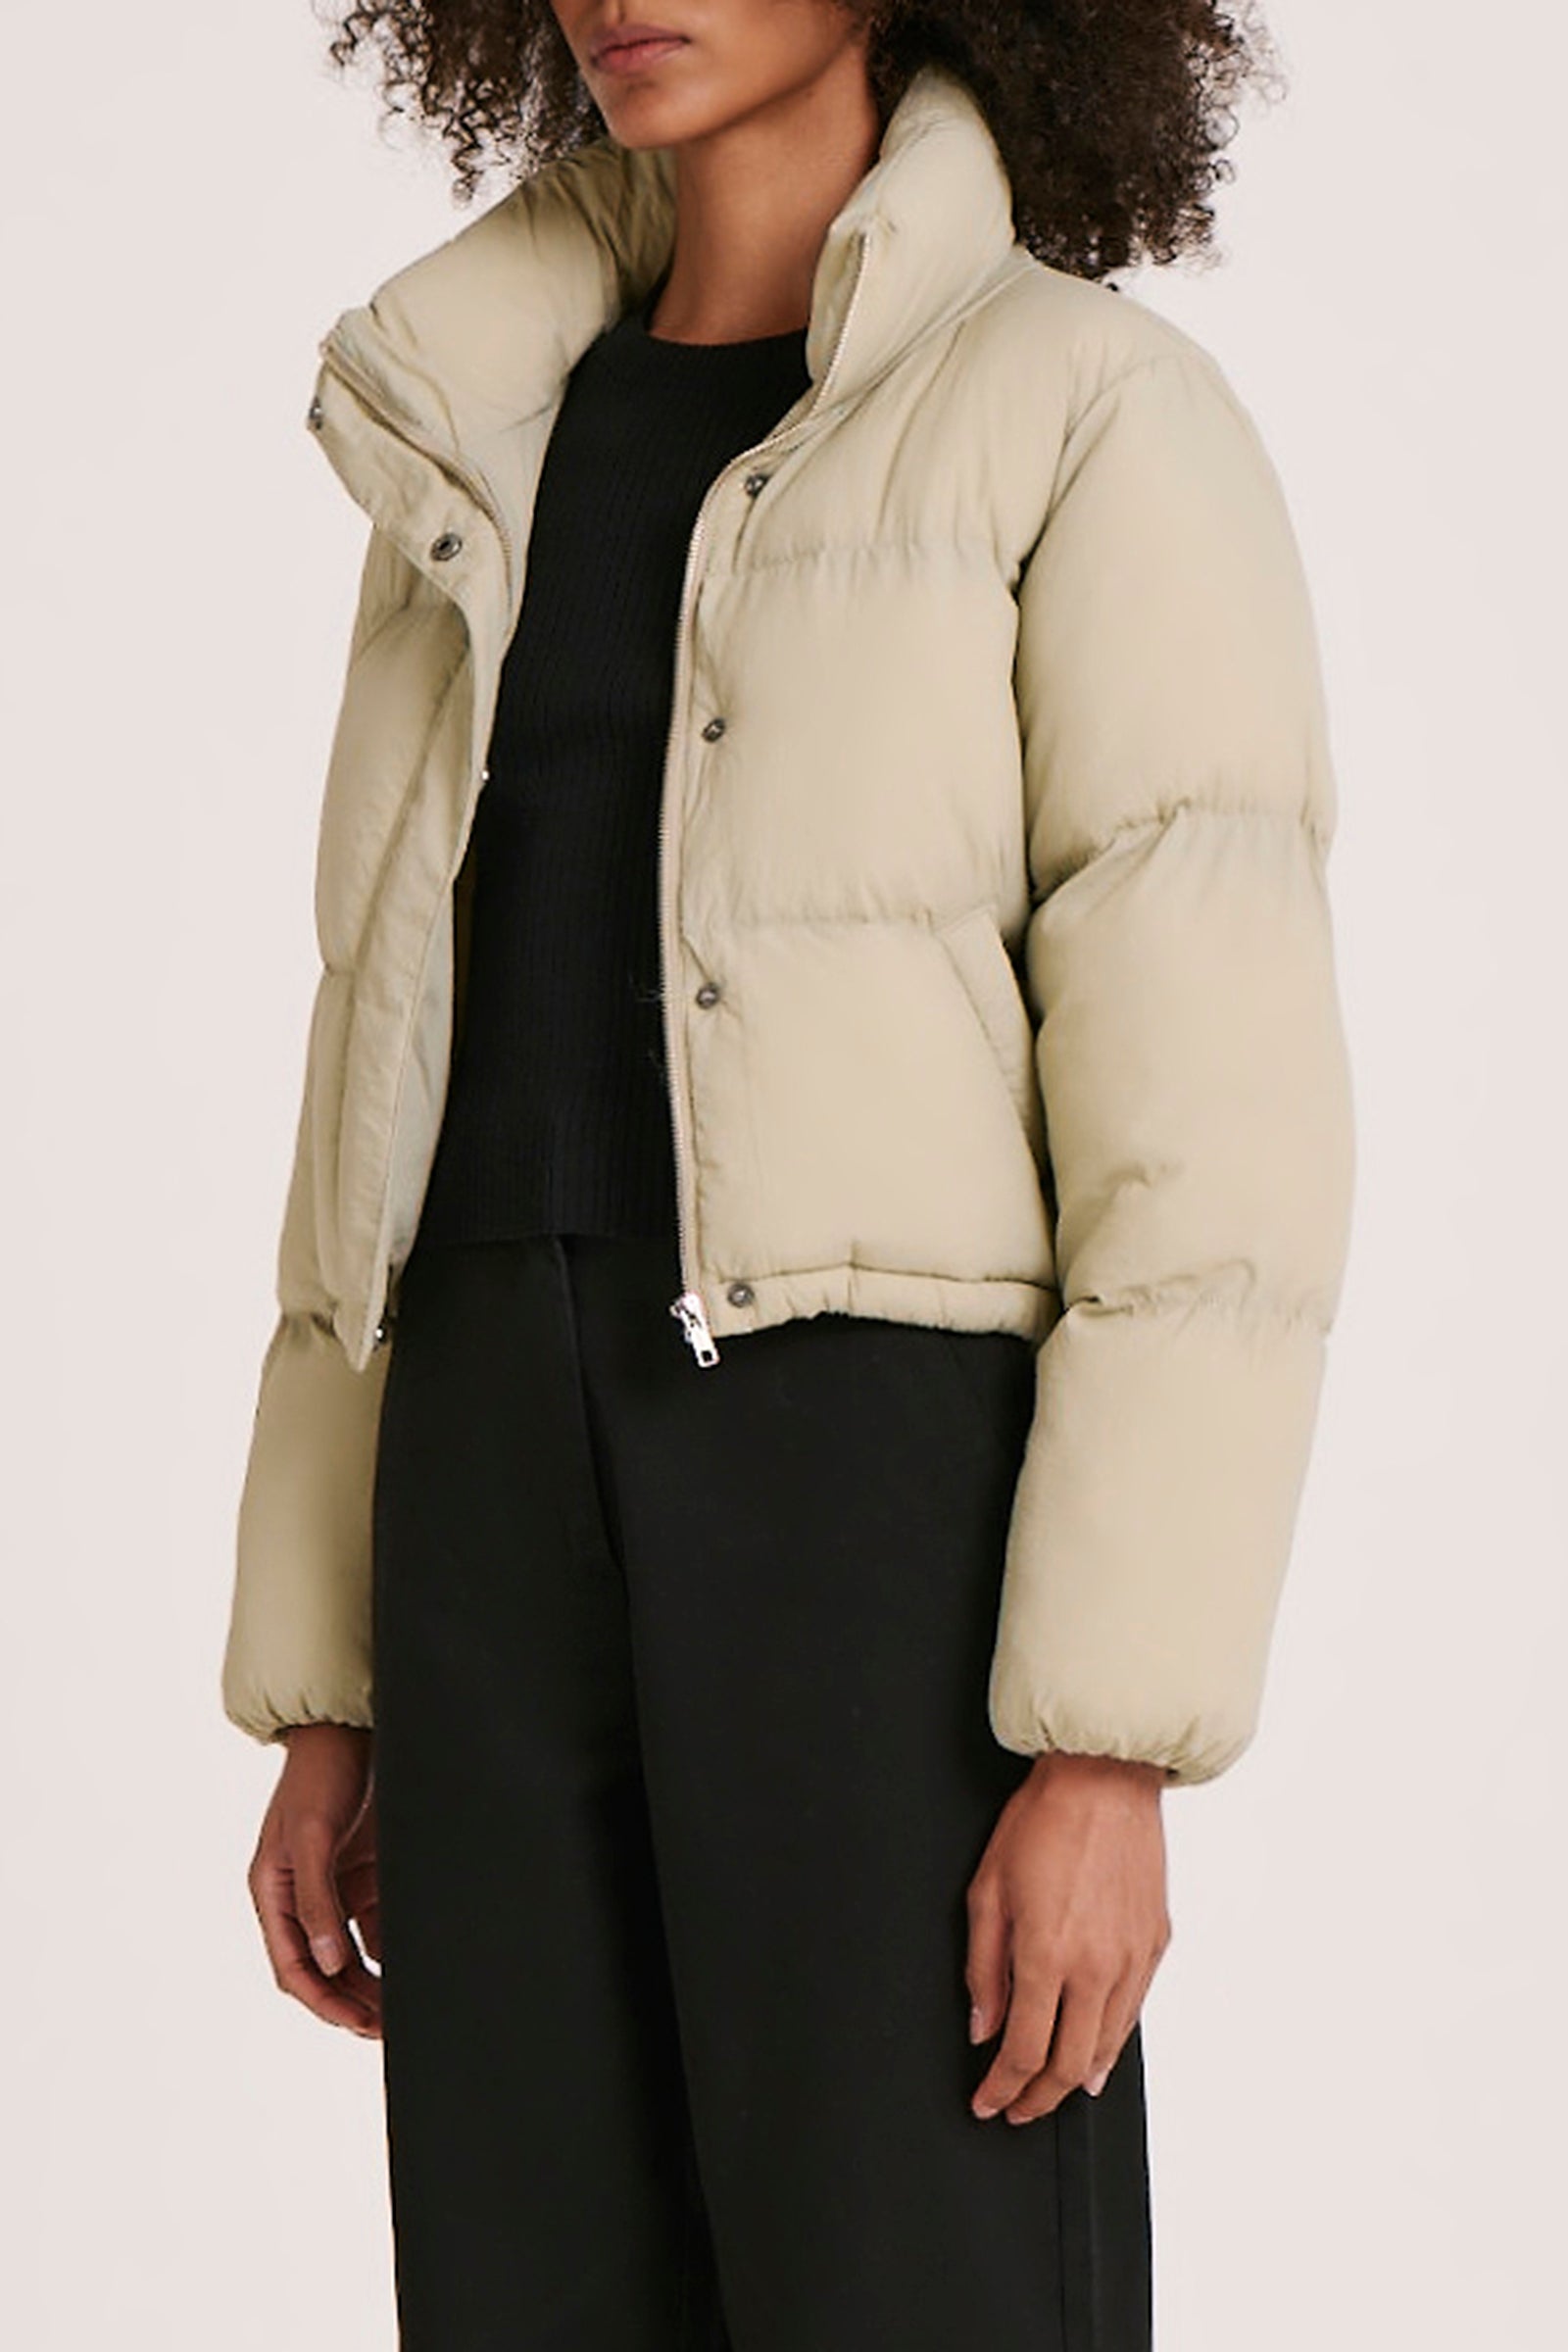 NUDE LUCY Topher Puffer Jacket - Cucumber